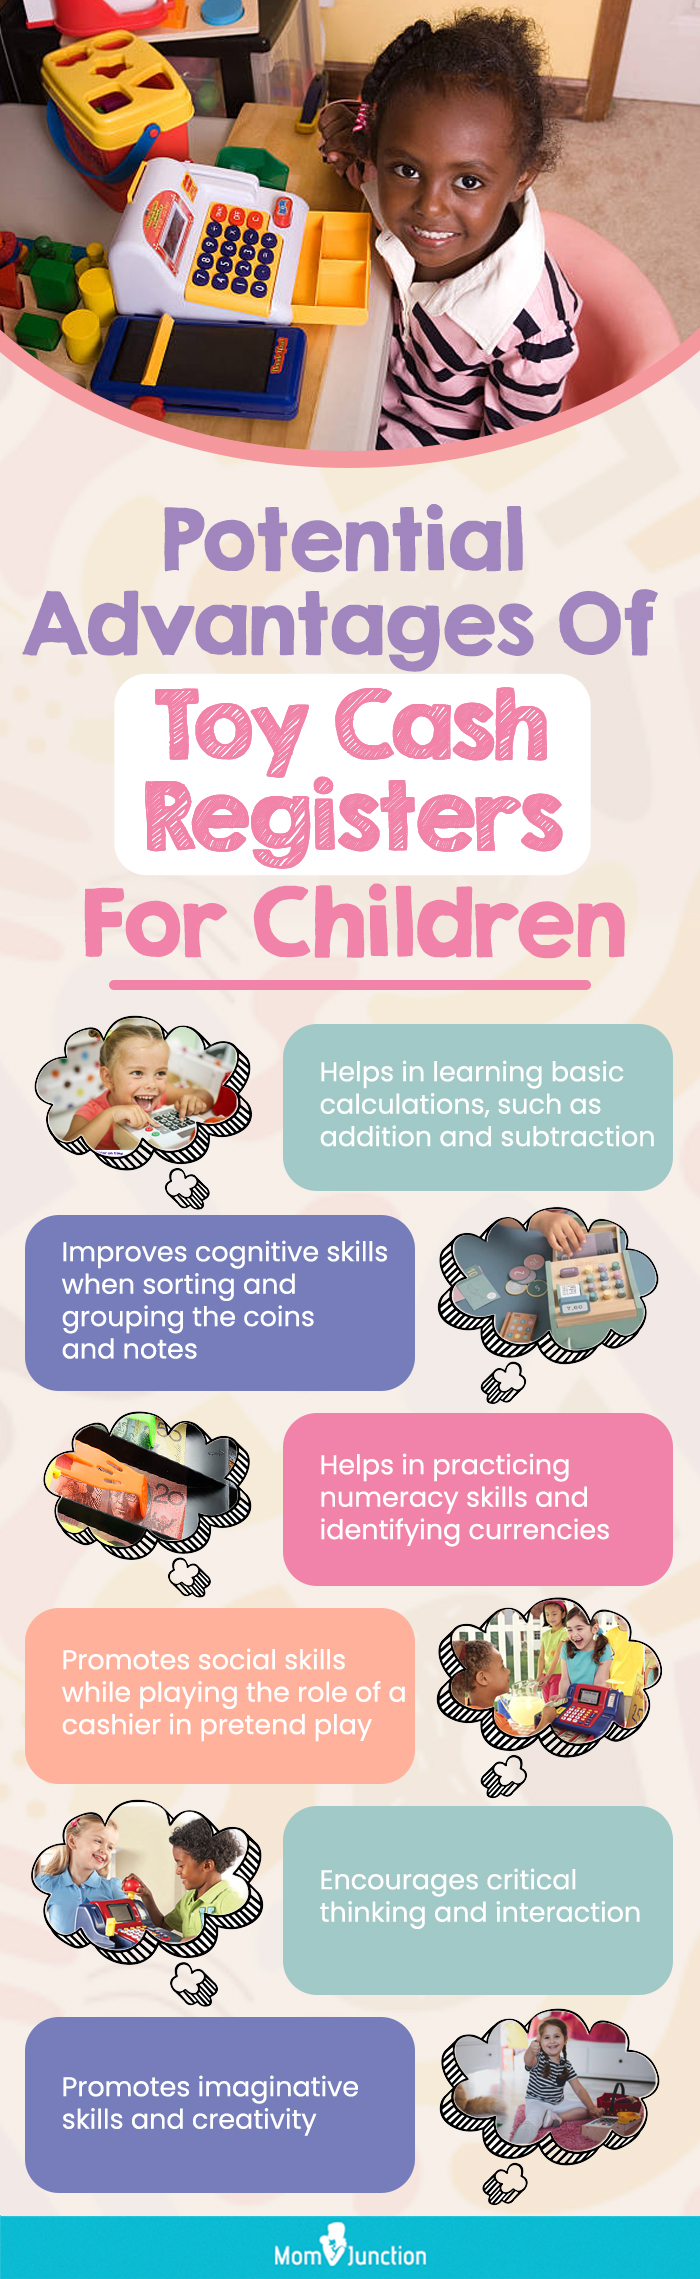 Potential Advantages Of Toy Cash Registers For Children (infographic)